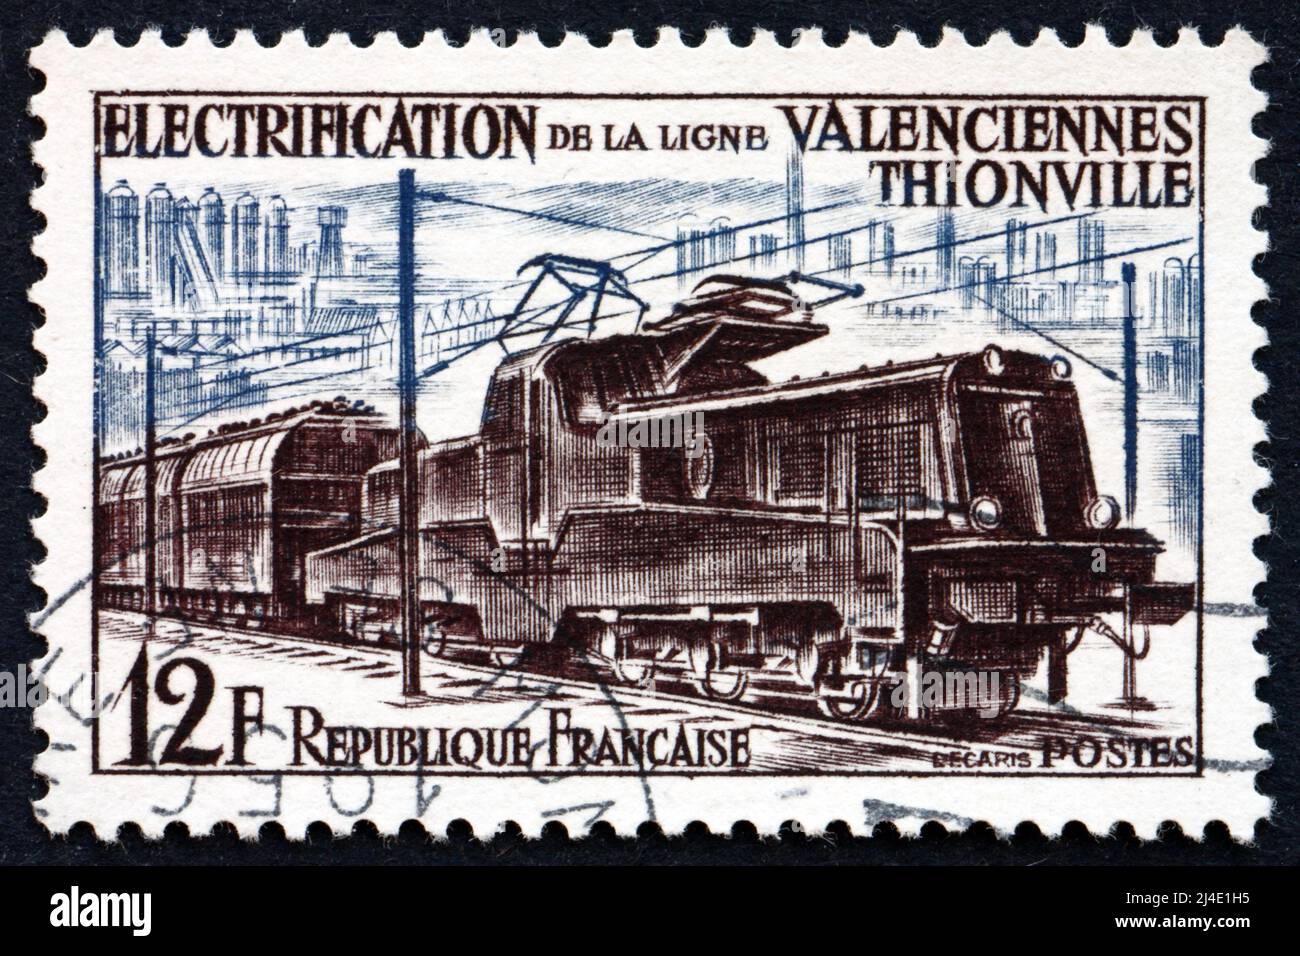 FRANCE - CIRCA 1955: a stamp printed in the France shows Electric Train, Electrification of the Valenciennes-Thionville Railroad Line, circa 1987 Stock Photo